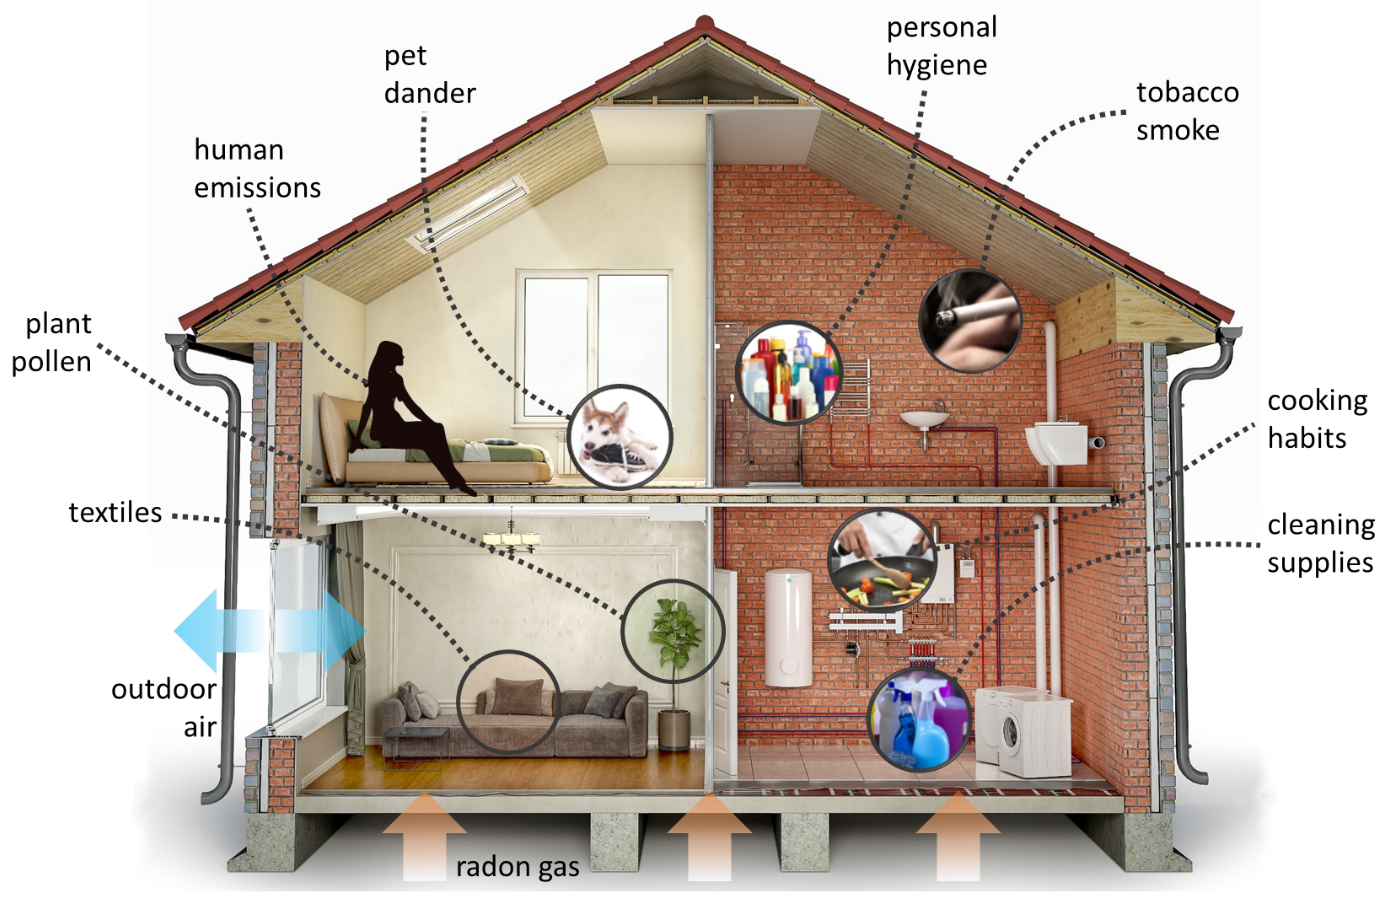 Illustration of house showing various sources of indoor pollutants inside